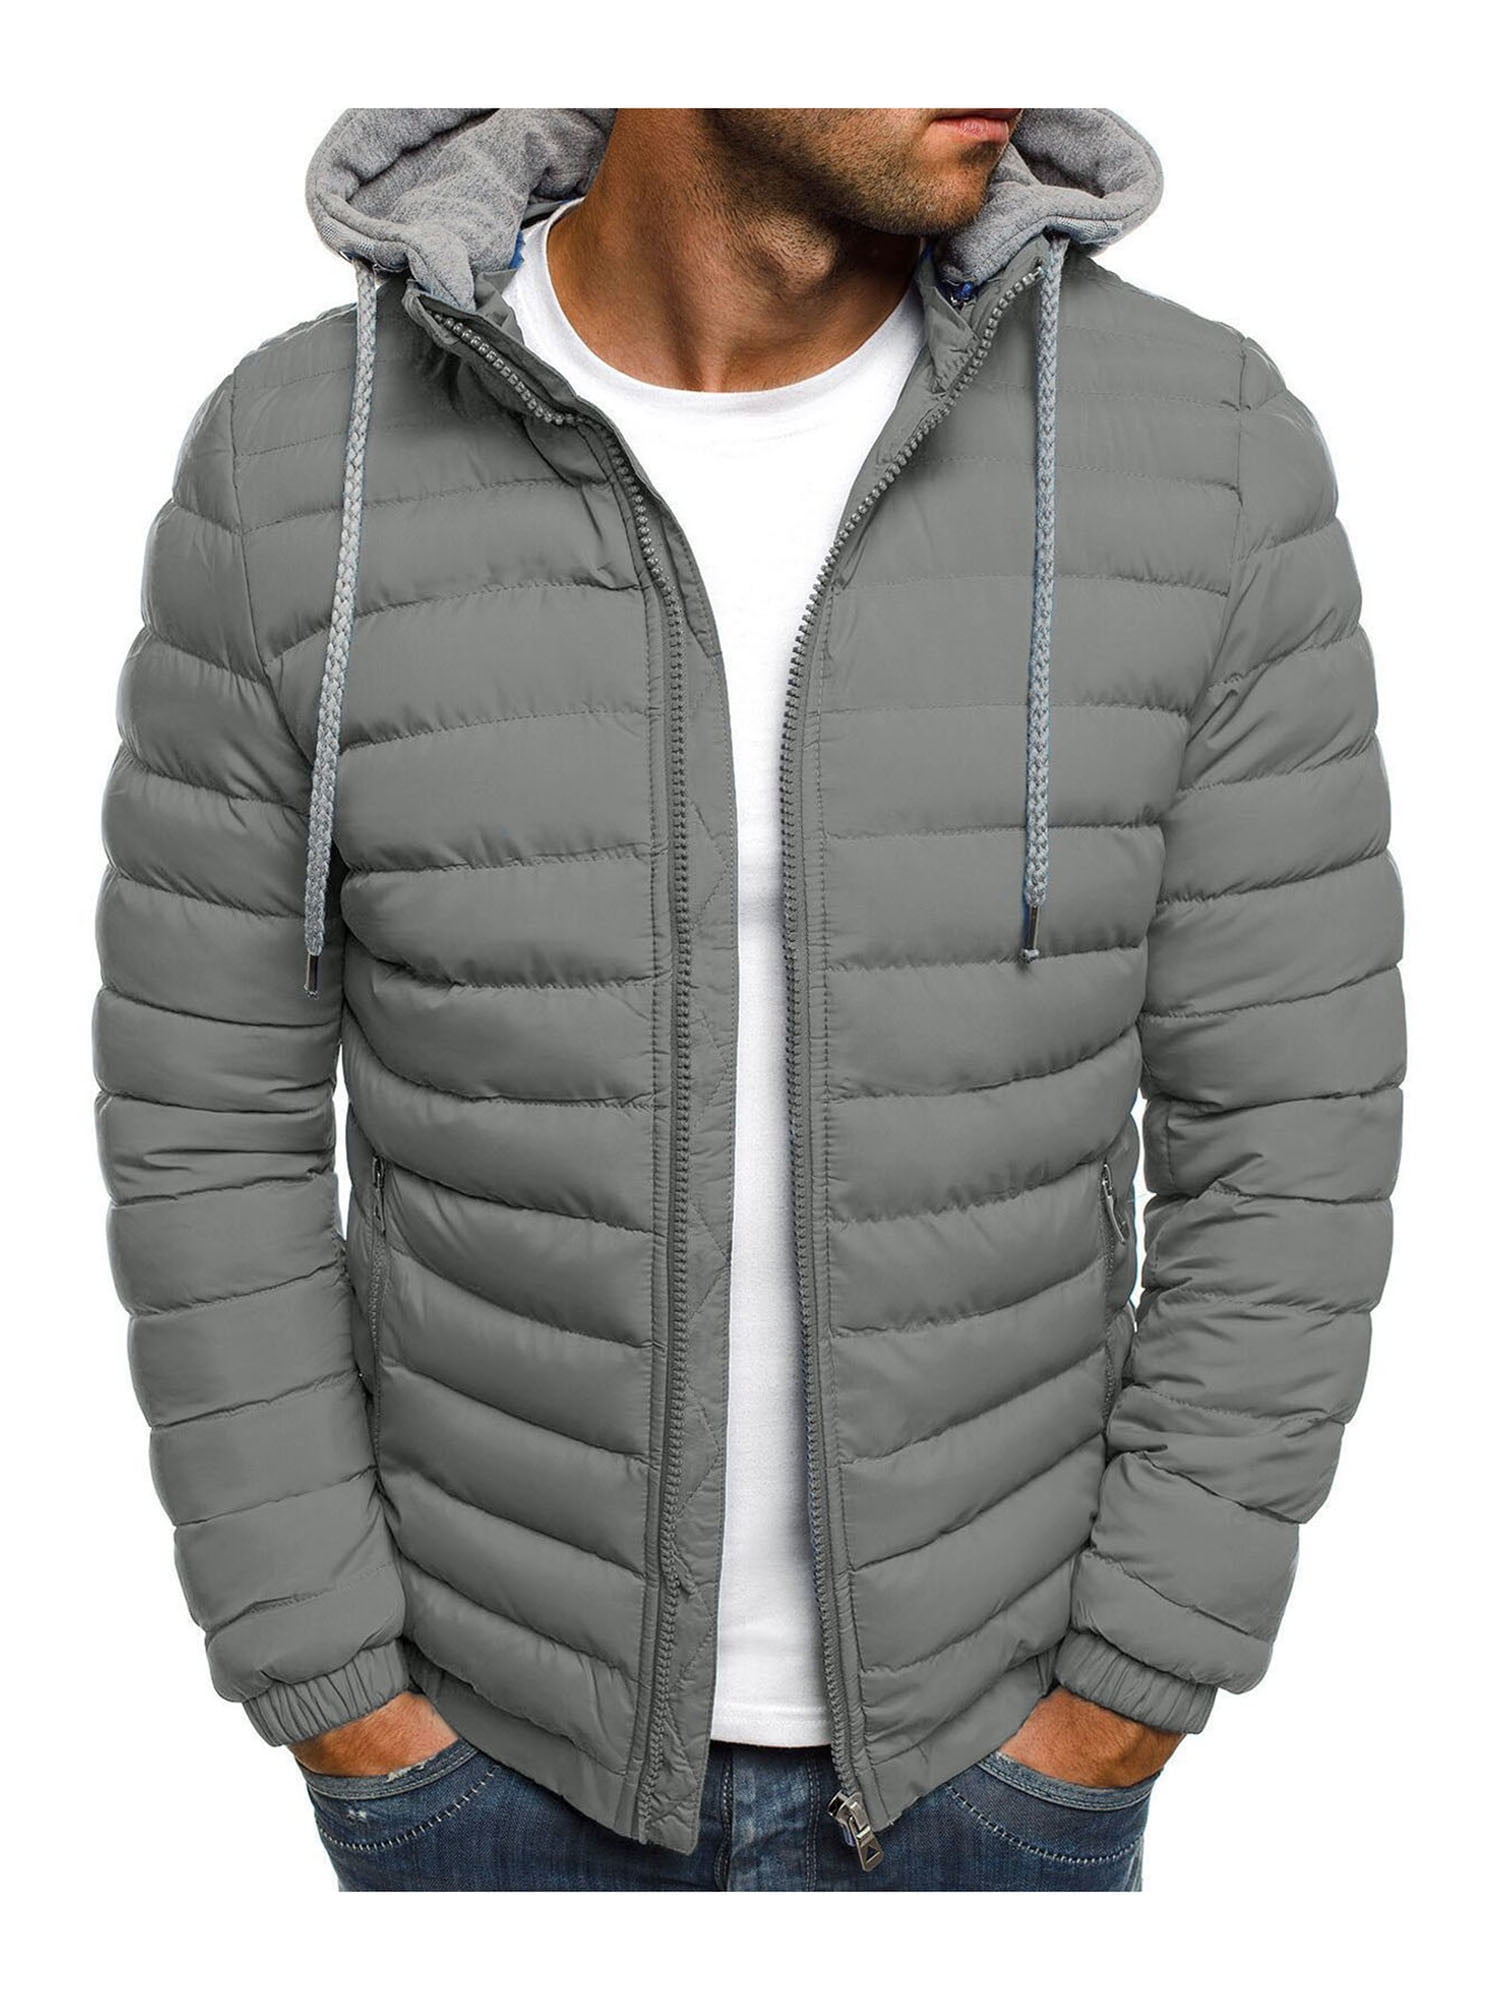 Rrive Mens Casual Cotton Zip-Up Hooded Thicken Winter Drawstring Flap Pockets Down Puffer Jacket 